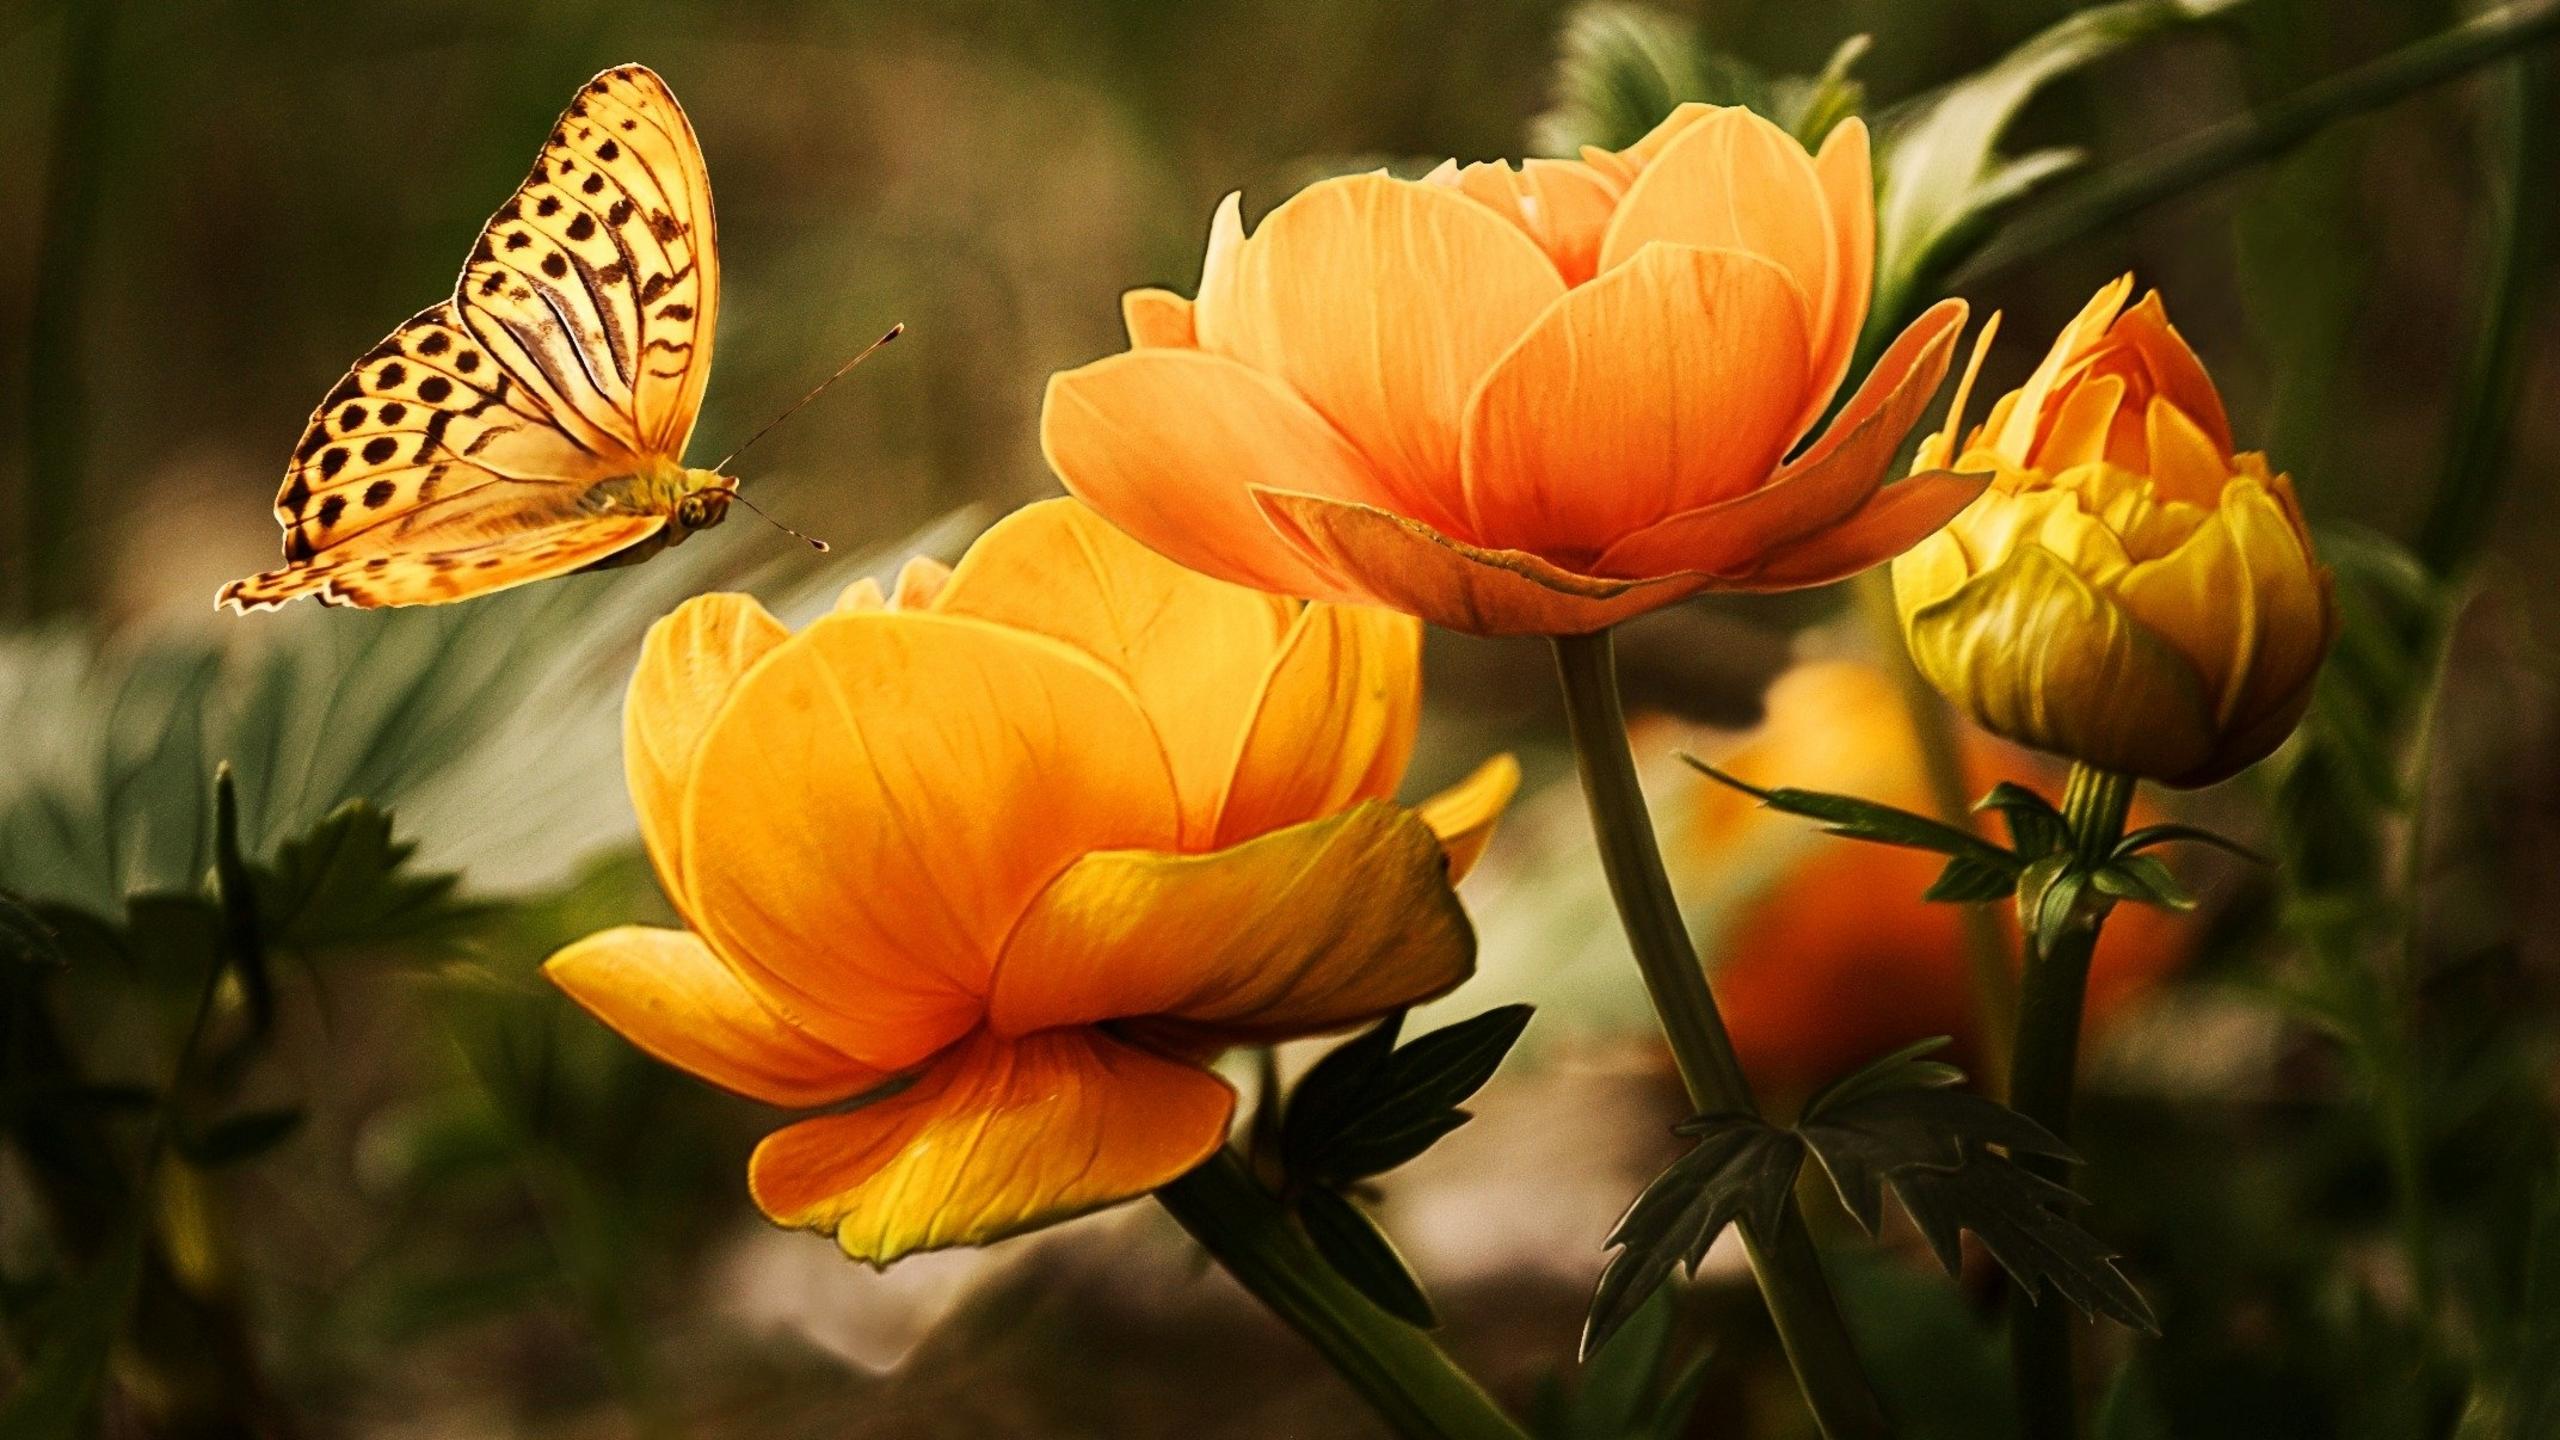 Butterfly 4k Wallpapers For Your Desktop Or Mobile Screen Free And Easy To Download